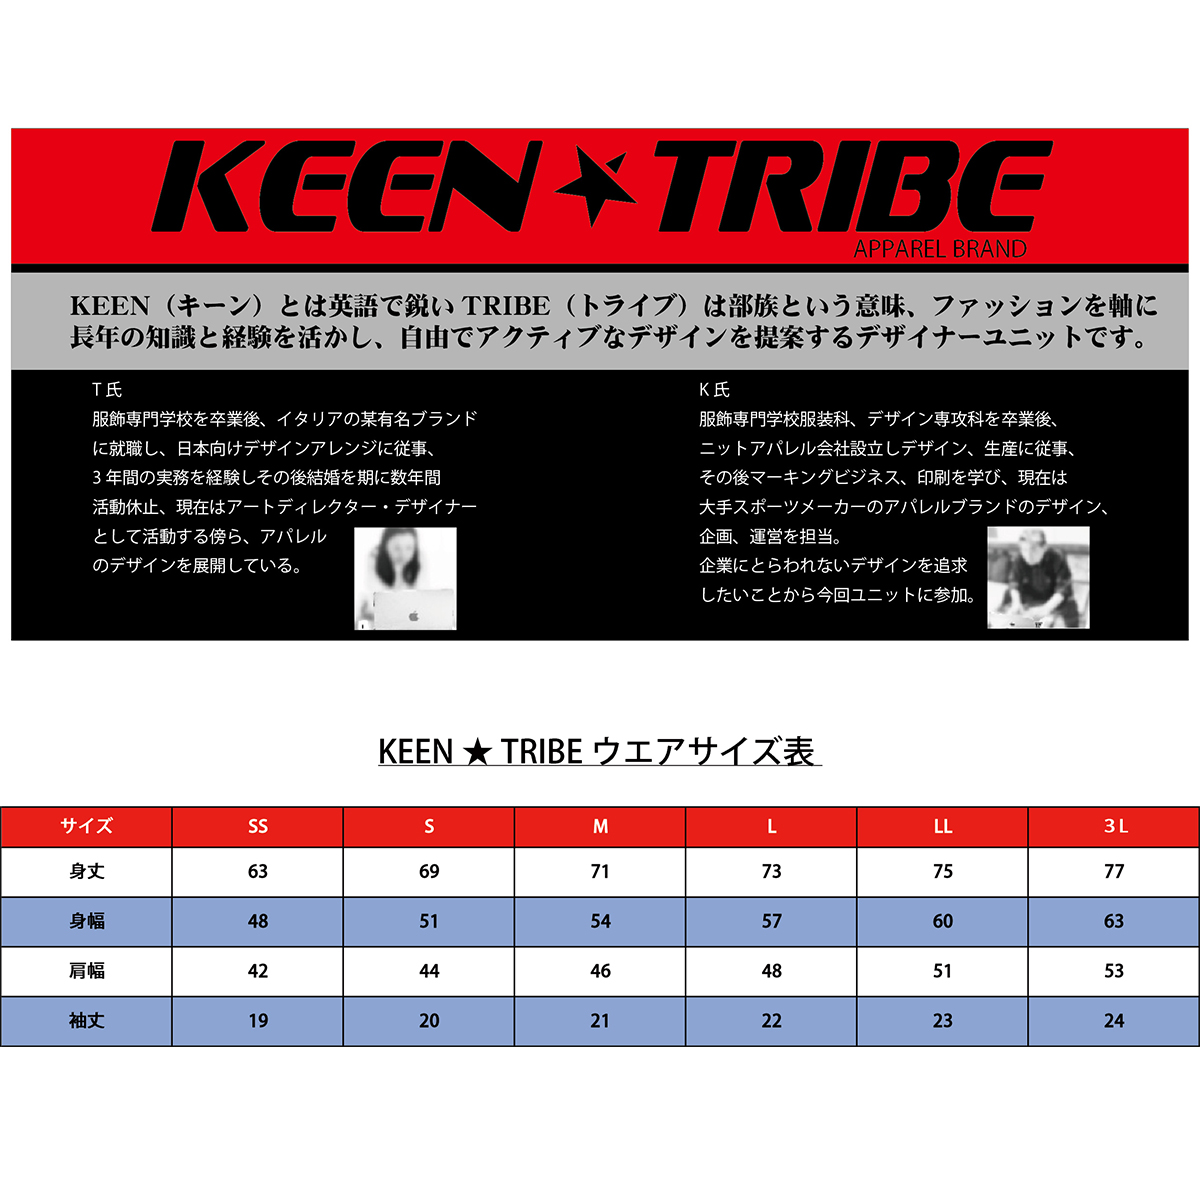 KEEN ★ TRIBE　KT-71(受注生産)